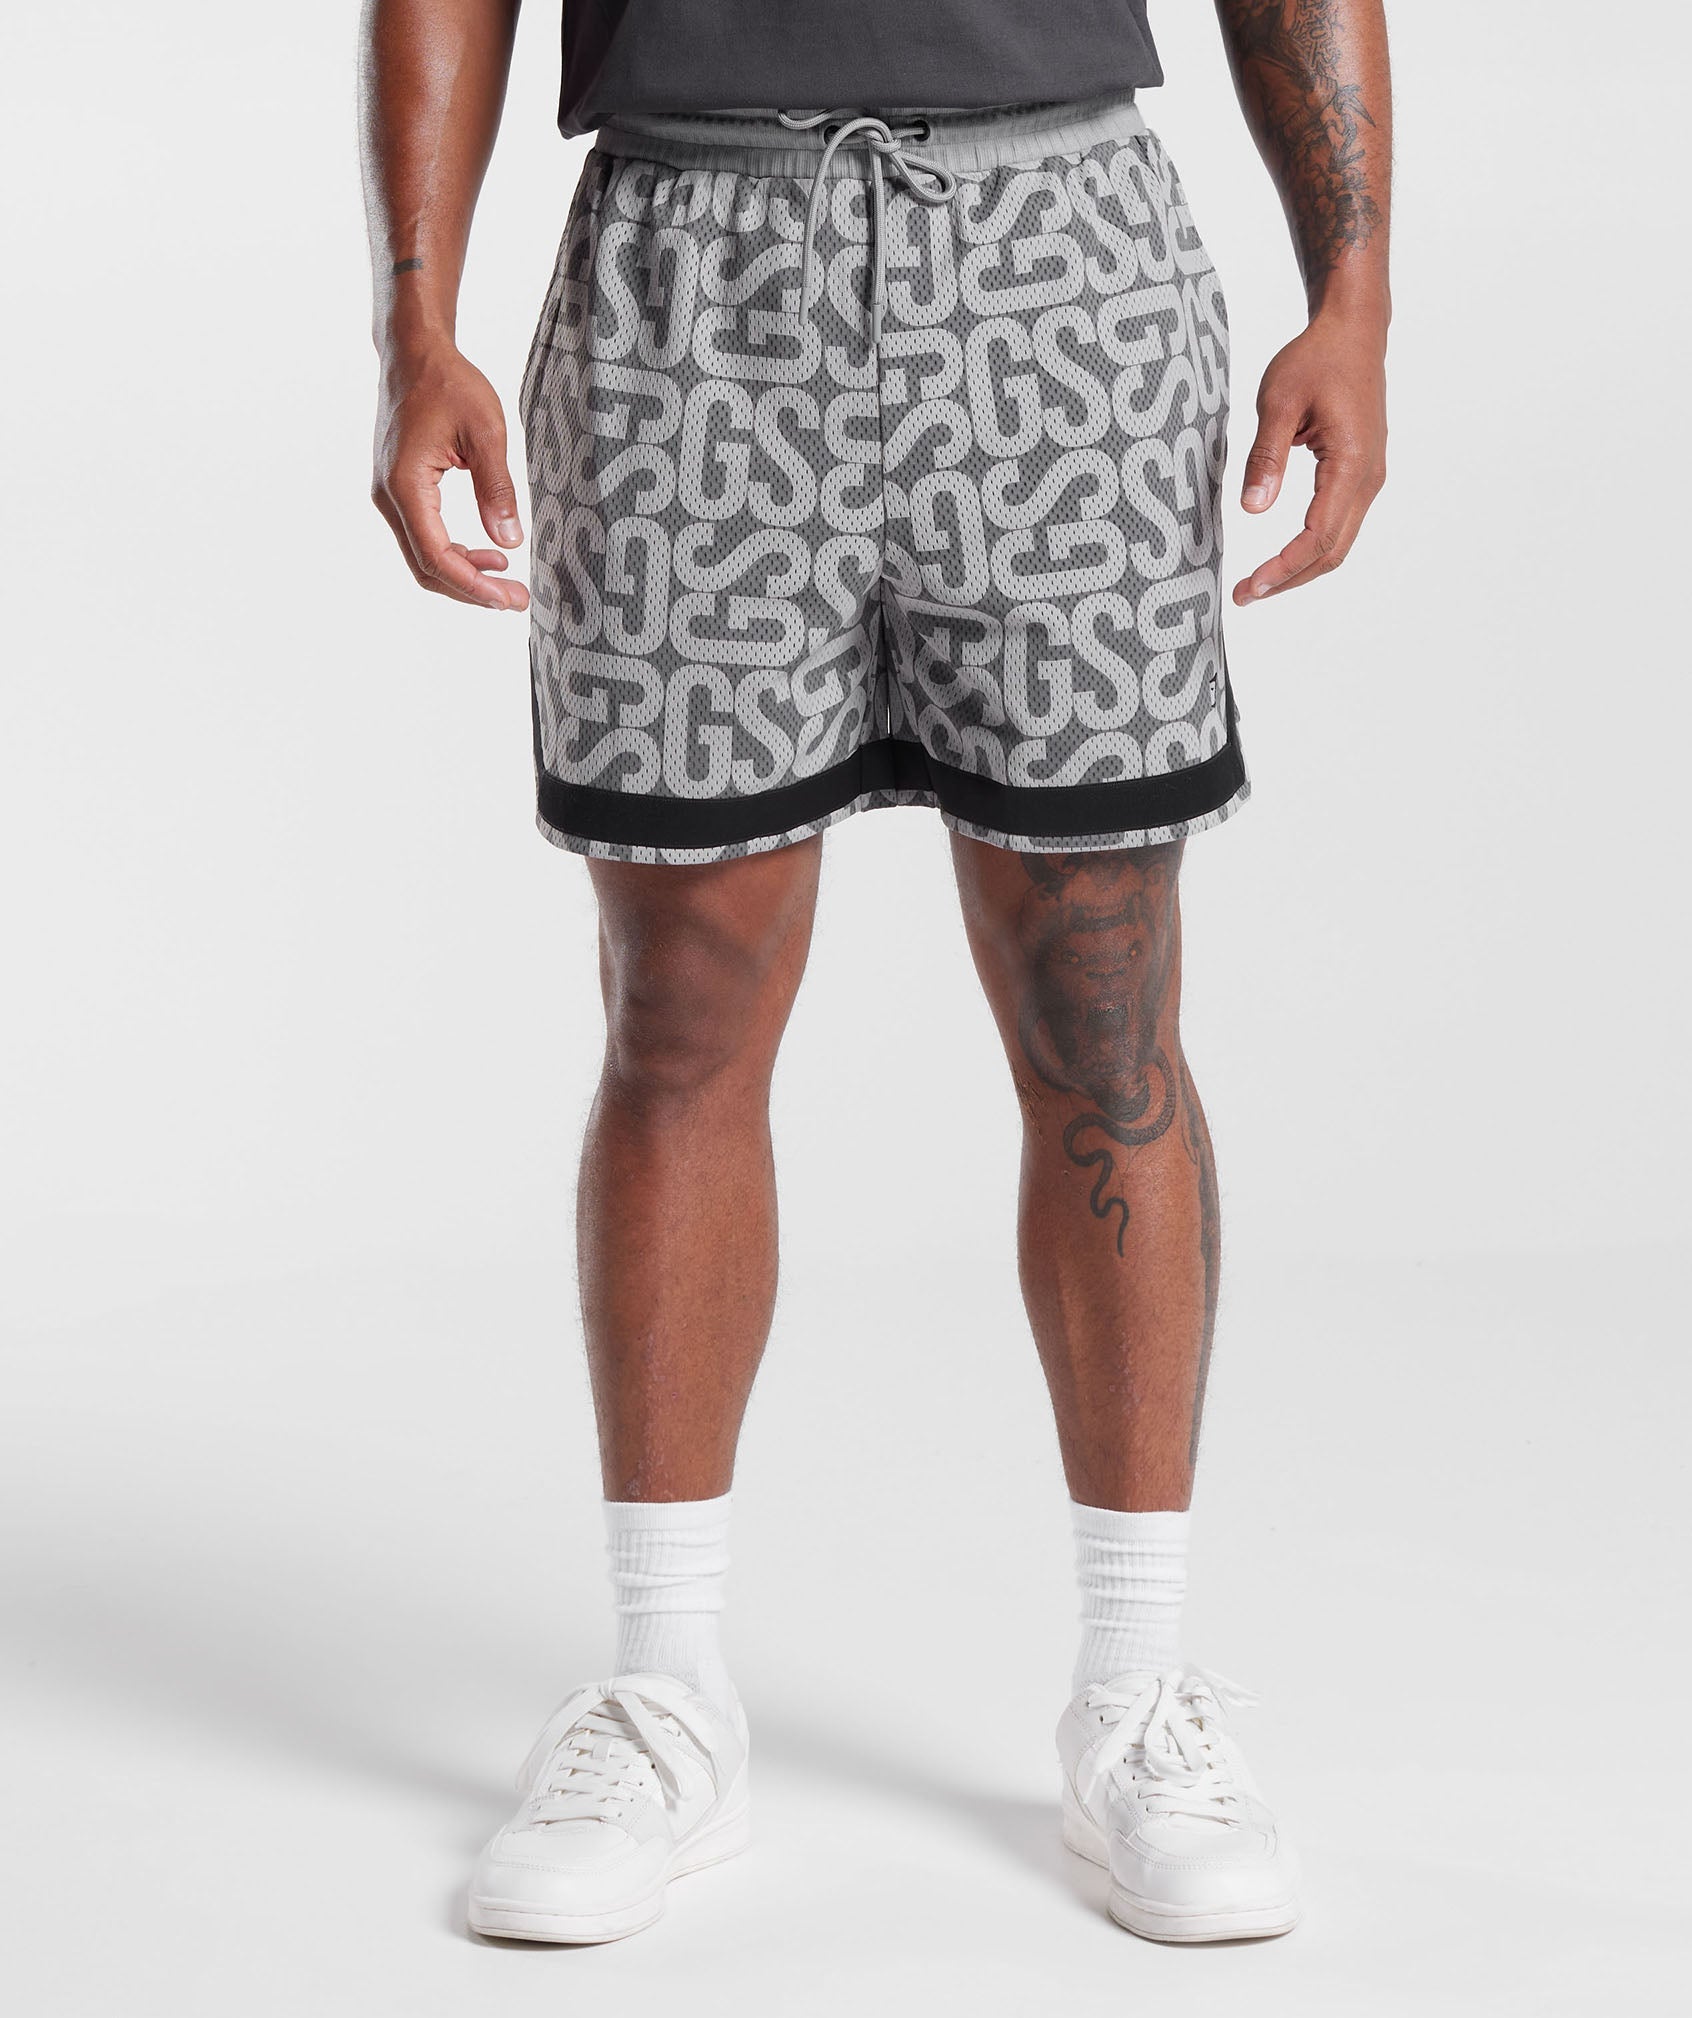 Rest Day Shorts in Smokey Grey - view 1